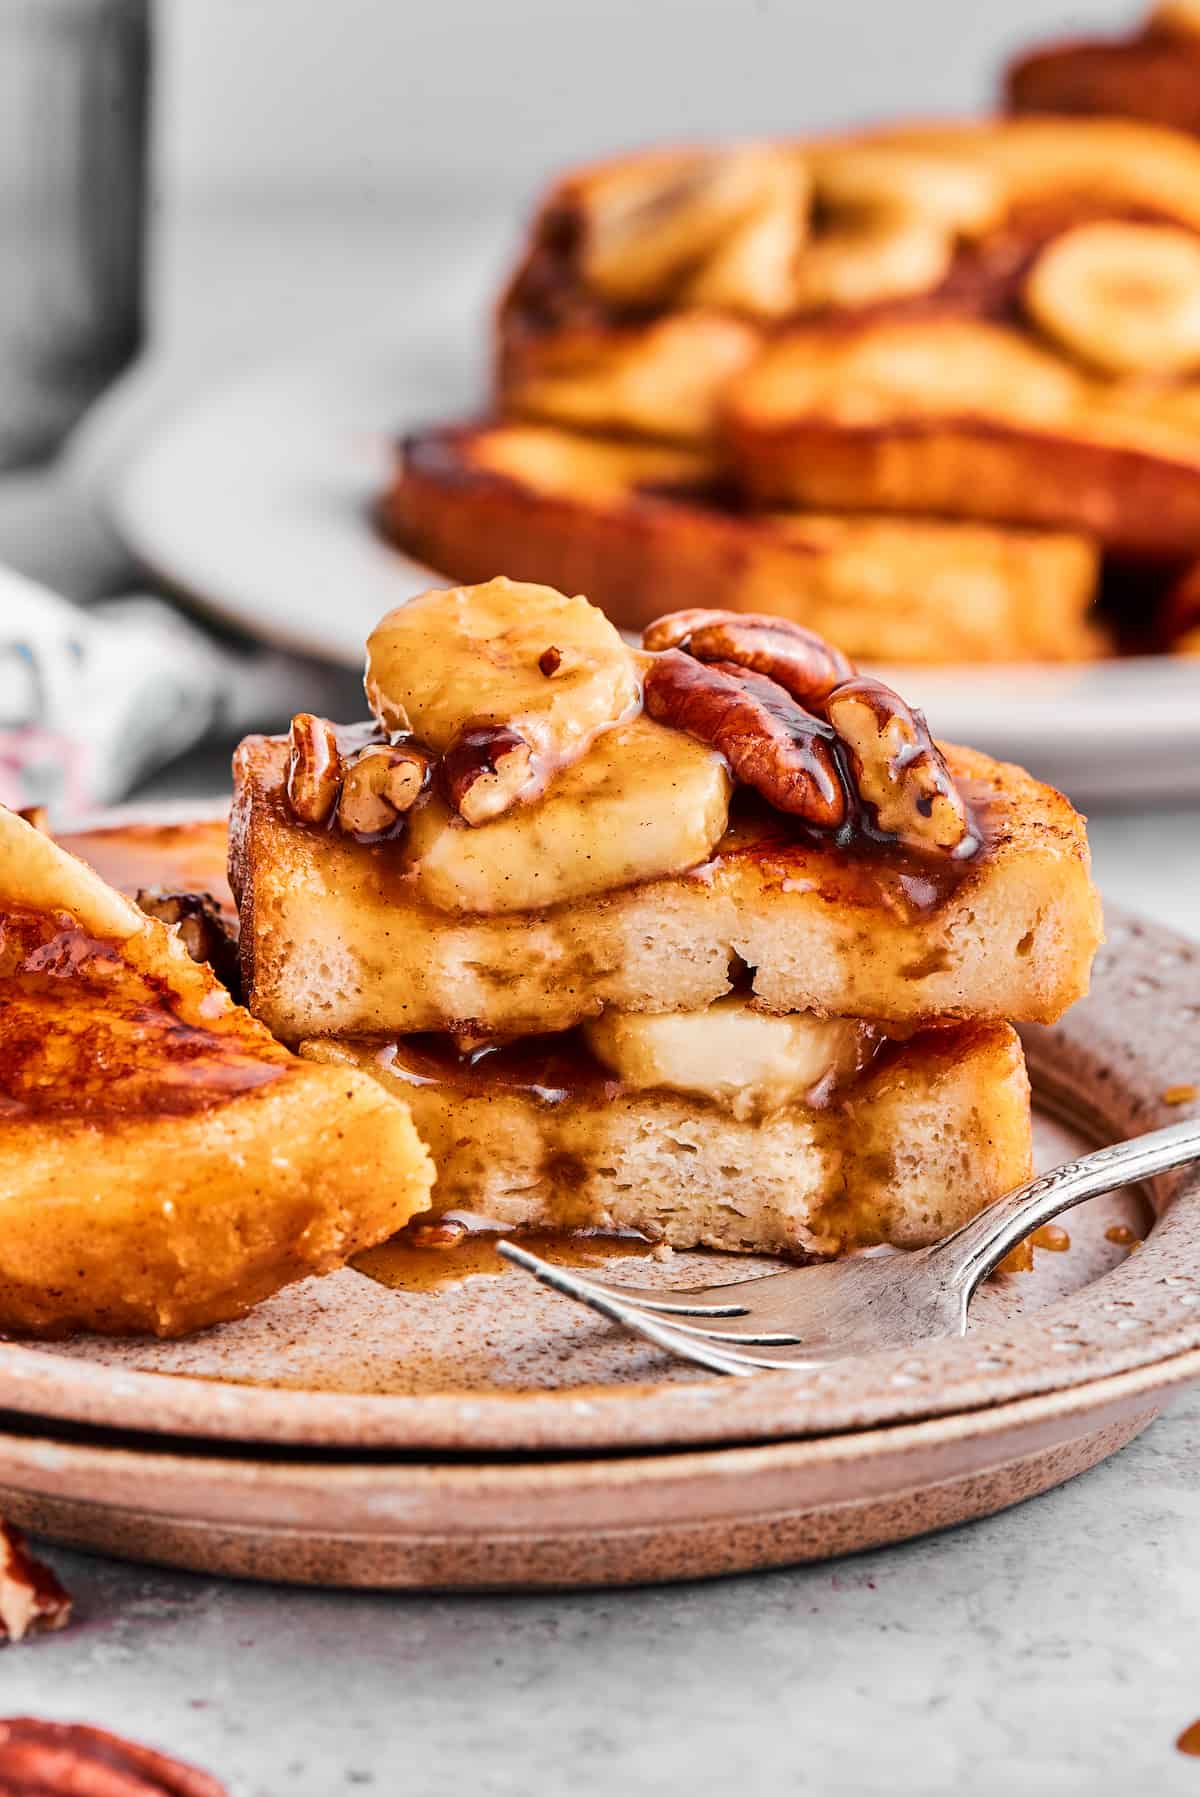 A plate of bananas foster French toast that has been cut into, with more French toast in the background.